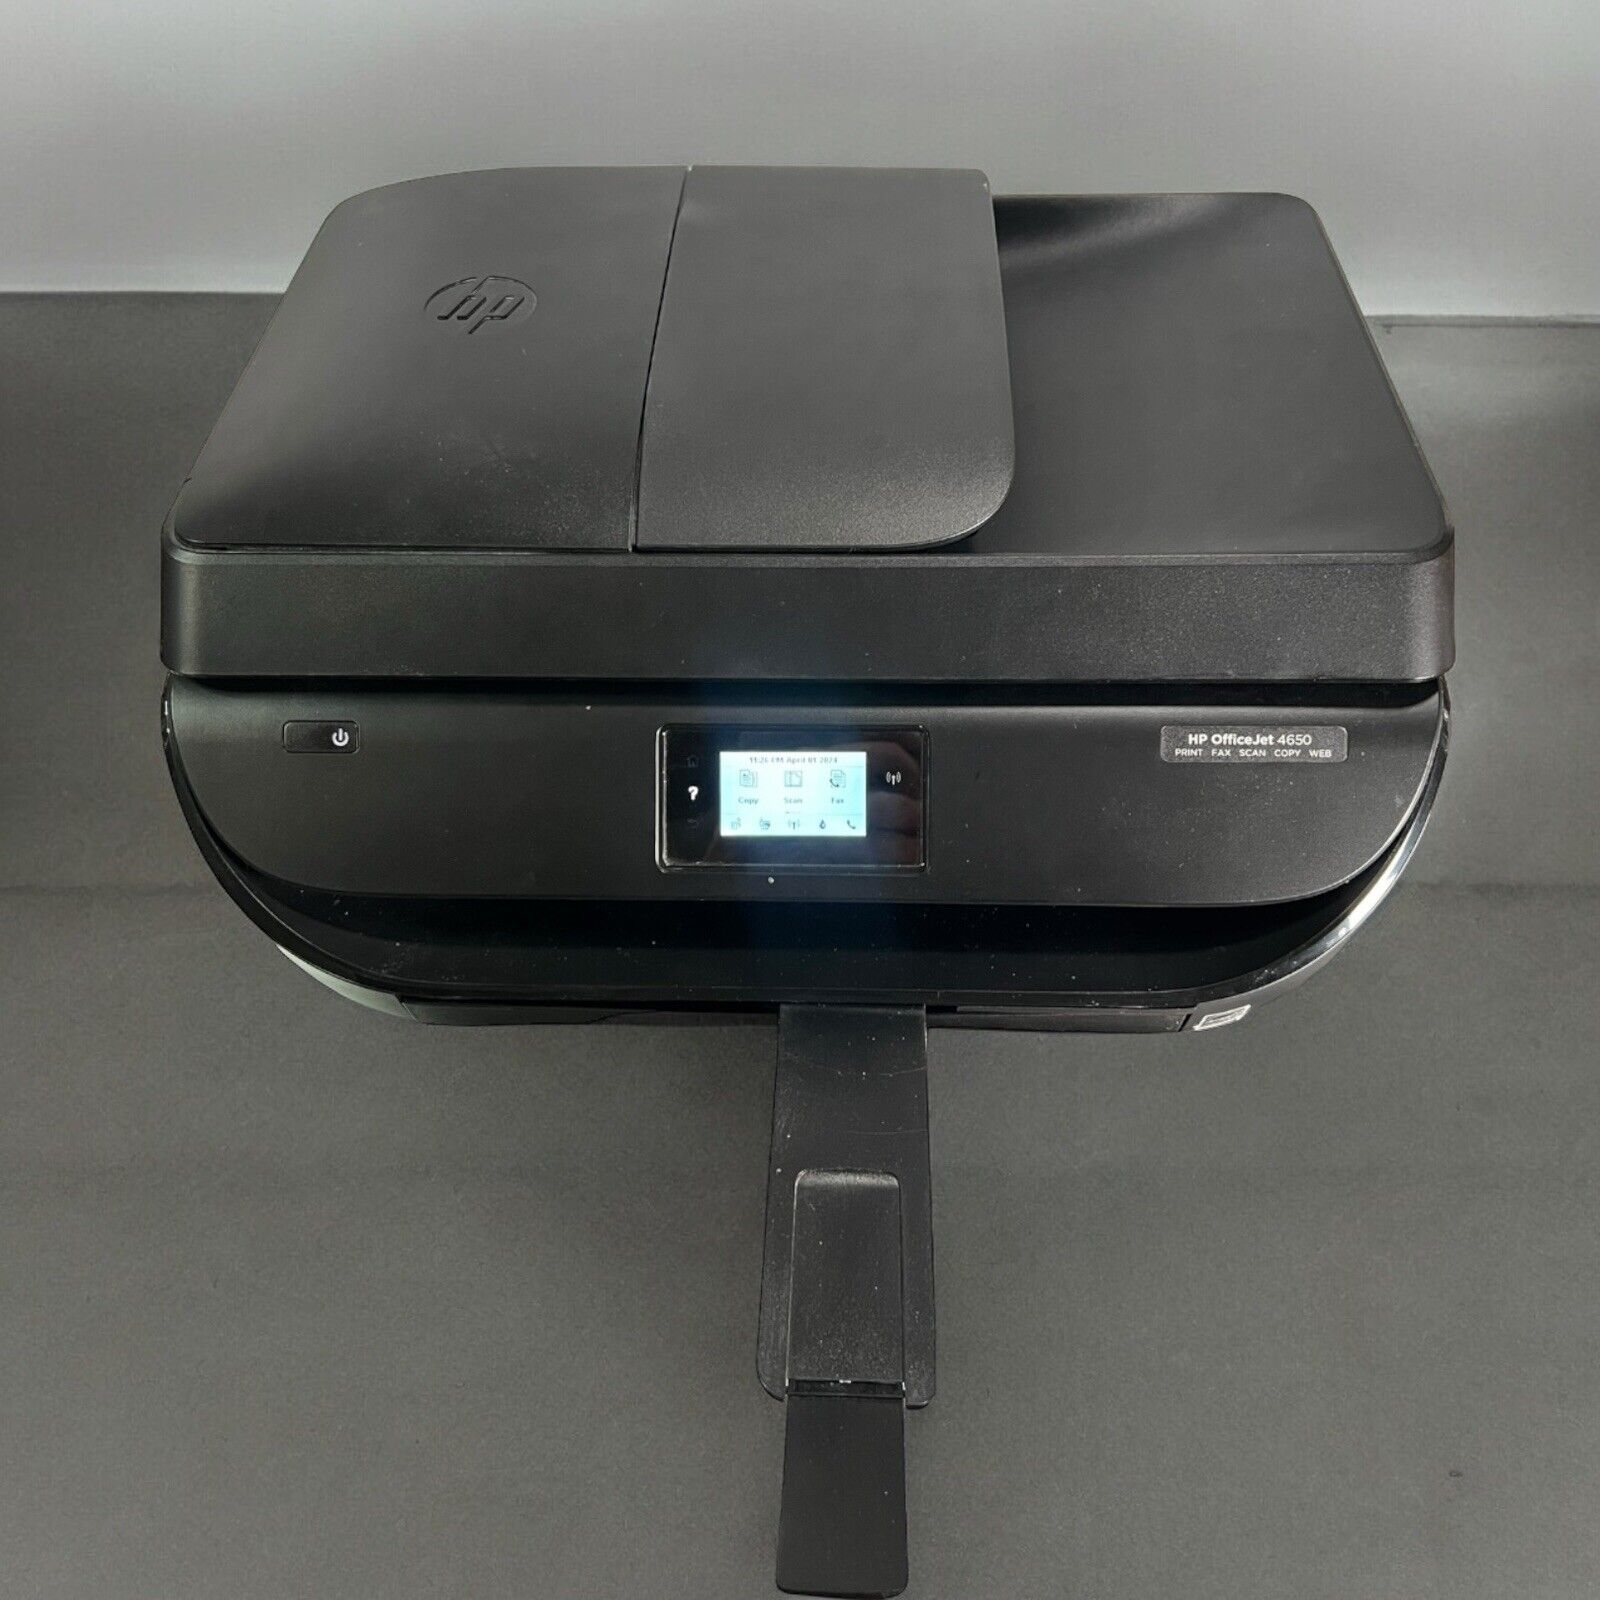 HP Officejet 4650 All-in-One Printer Wireless Page Count 9775 Tested